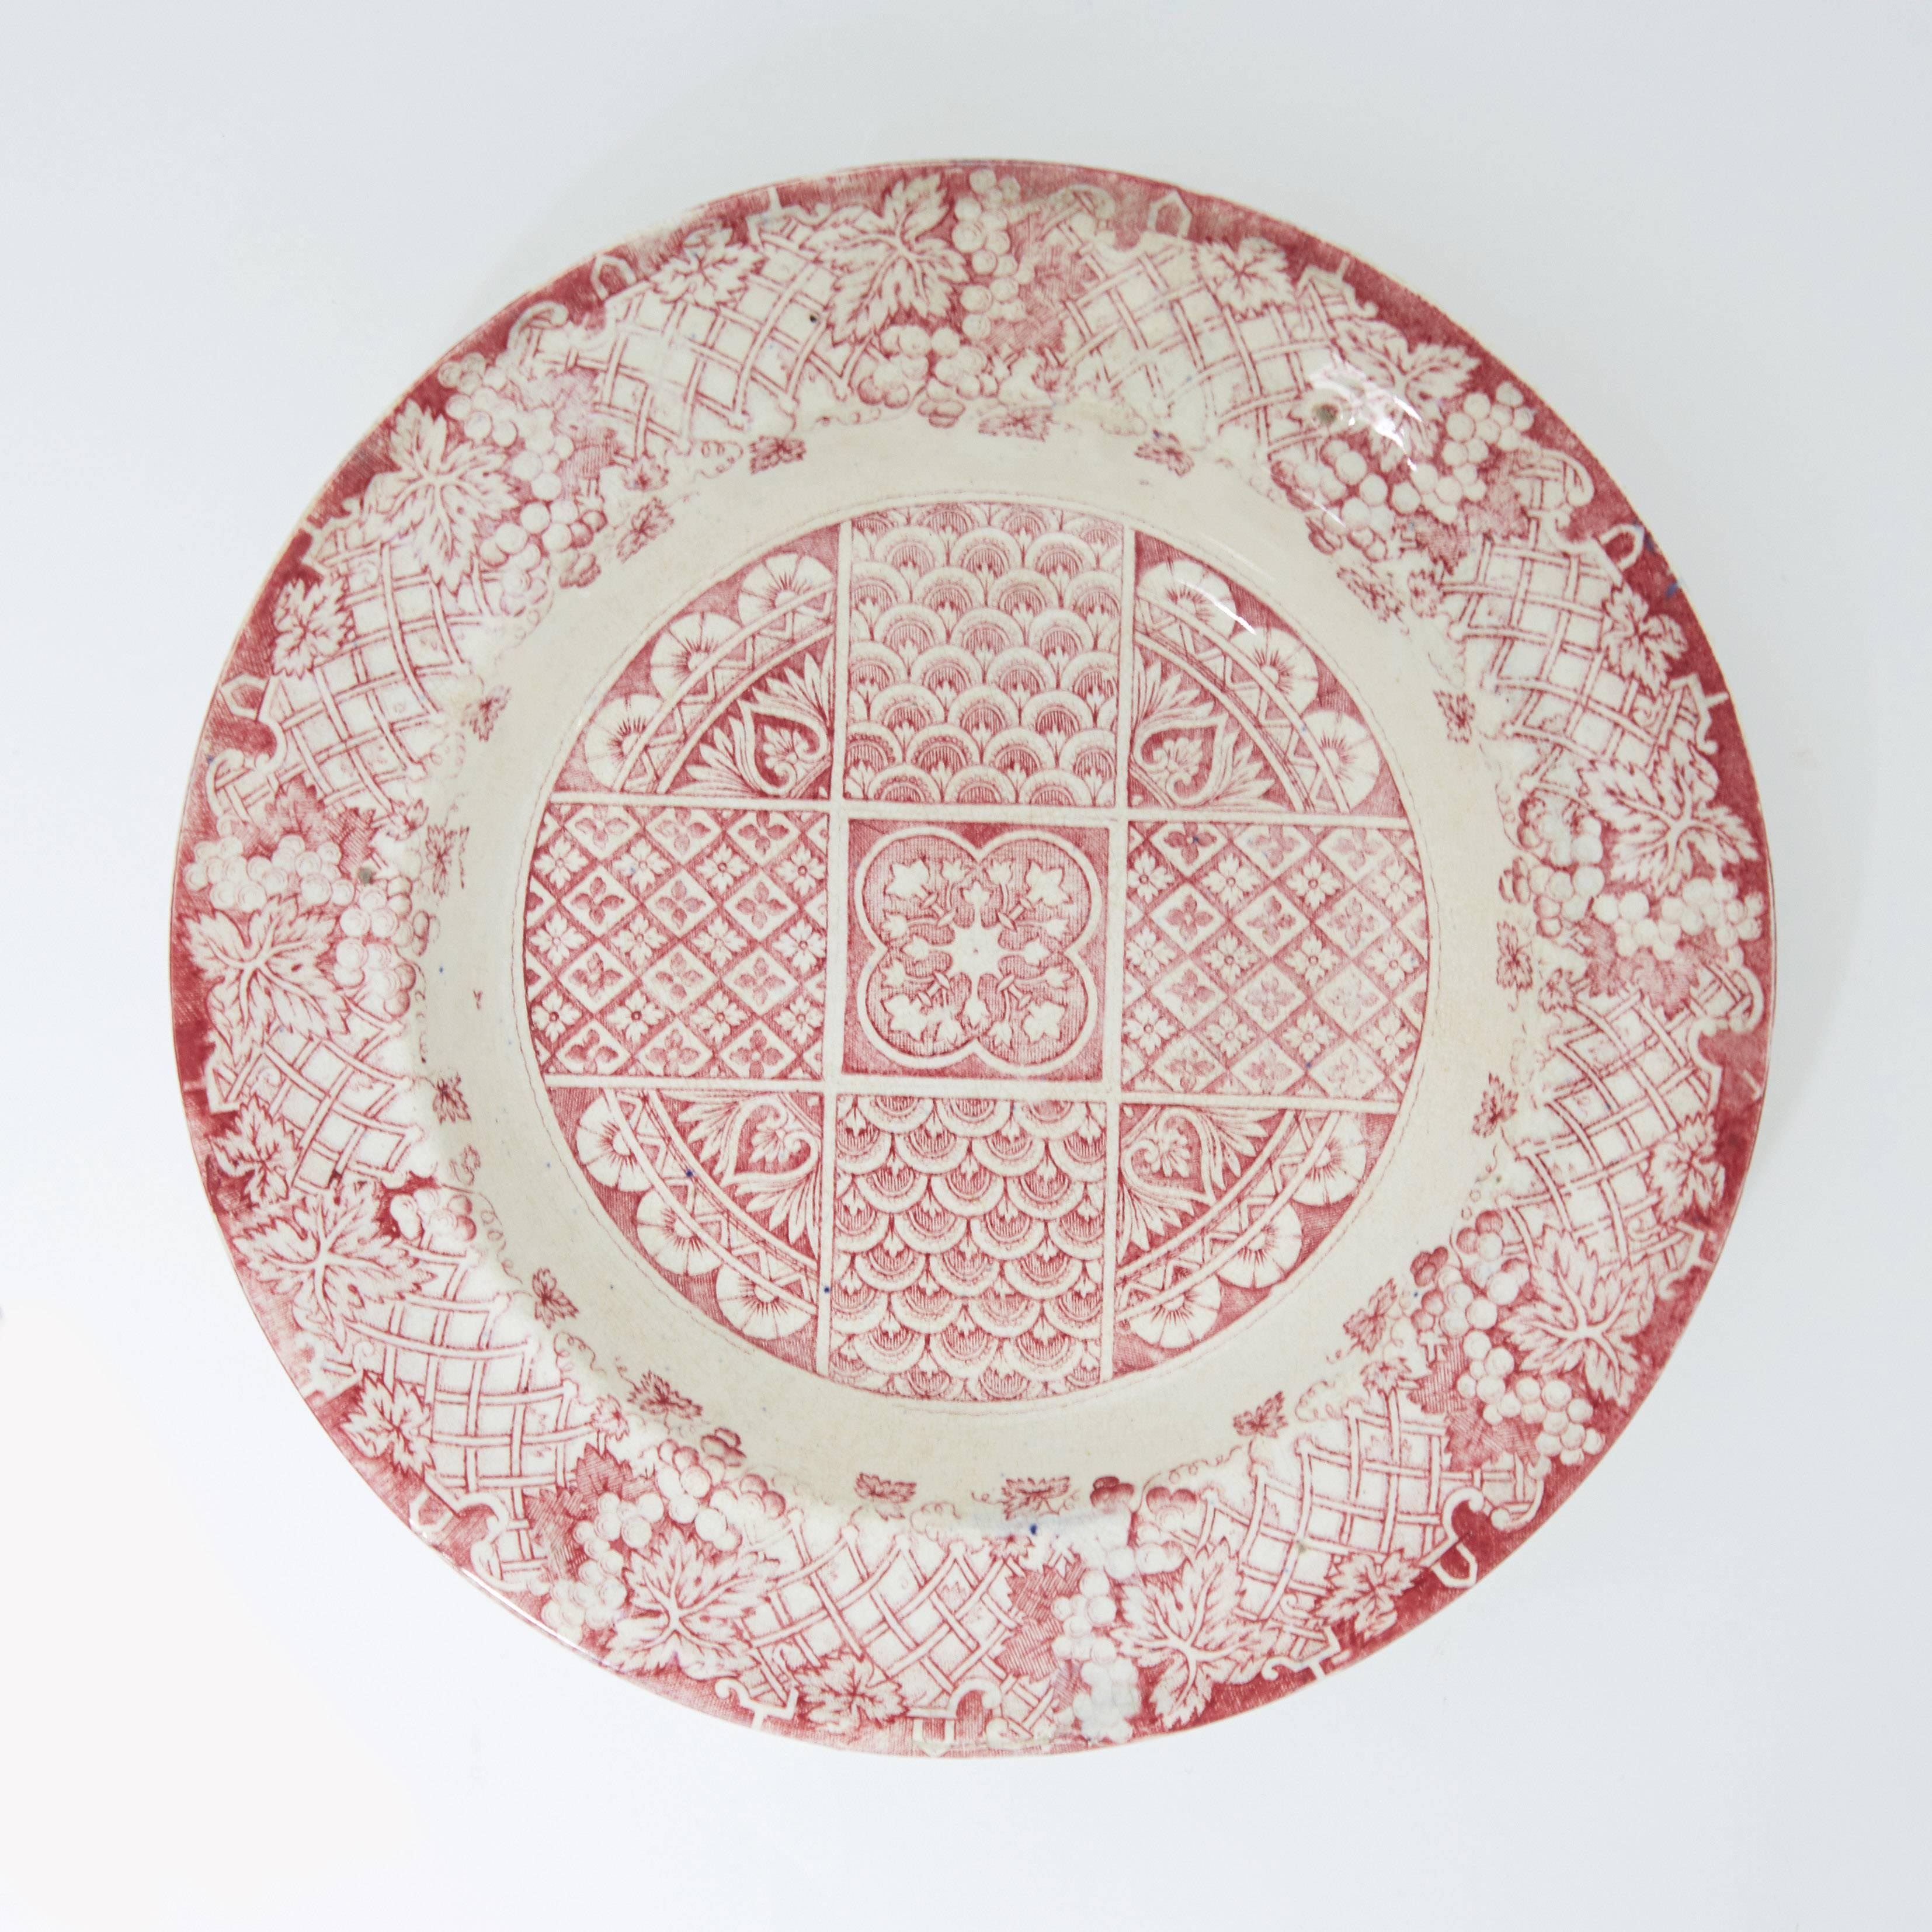 This set of ten plates has a very interesting variety of decorative motifs, alternating in red and blue. They are vintage dating to the early 1940s and are in very good conditions. No chips, but the color in a few plates is slightly faded.